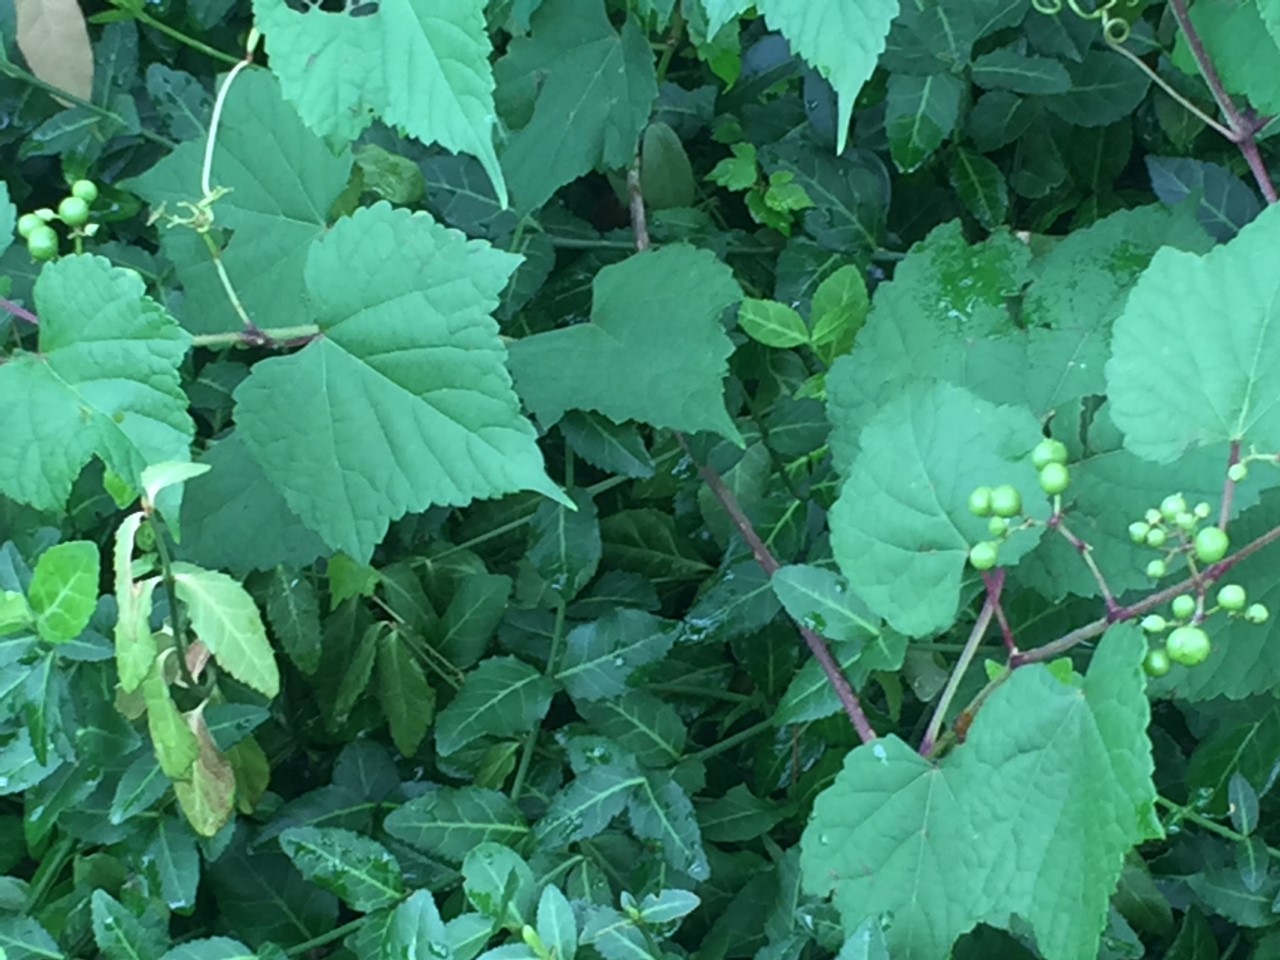 Various green leaves and grapes.